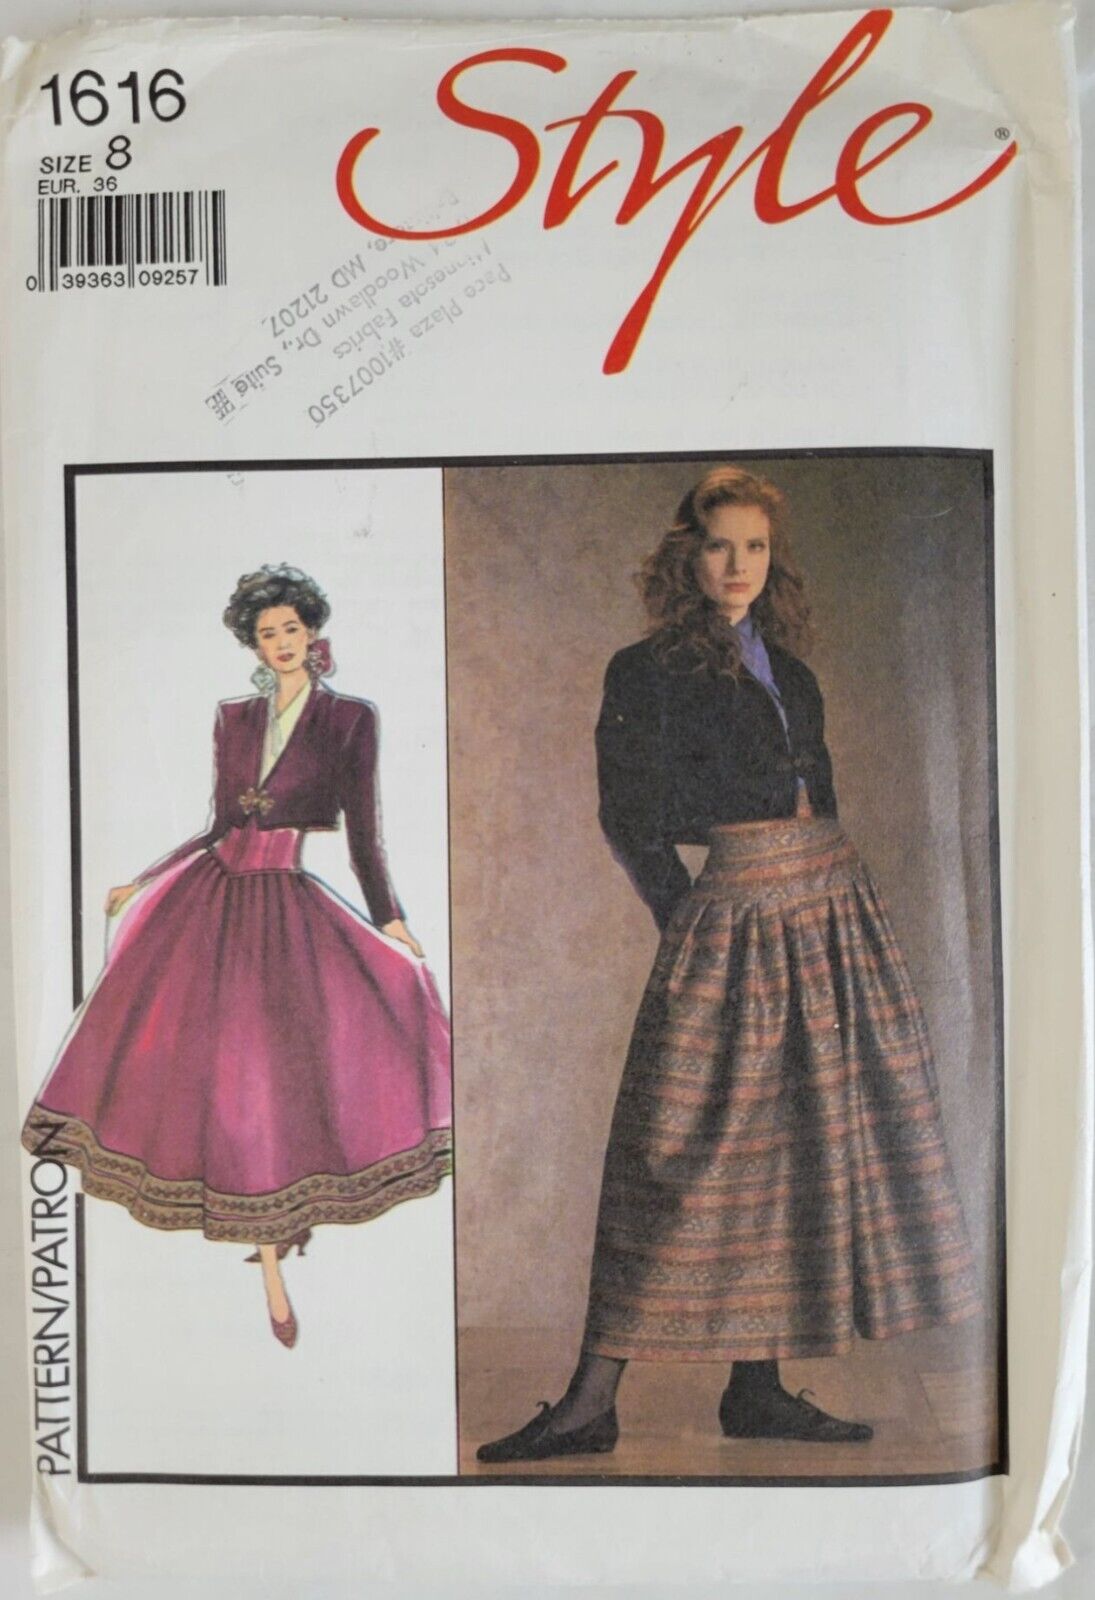 Style 1616 Vintage Sewing Pattern Misses Lined Jacket Skirt Size 8 Uncut